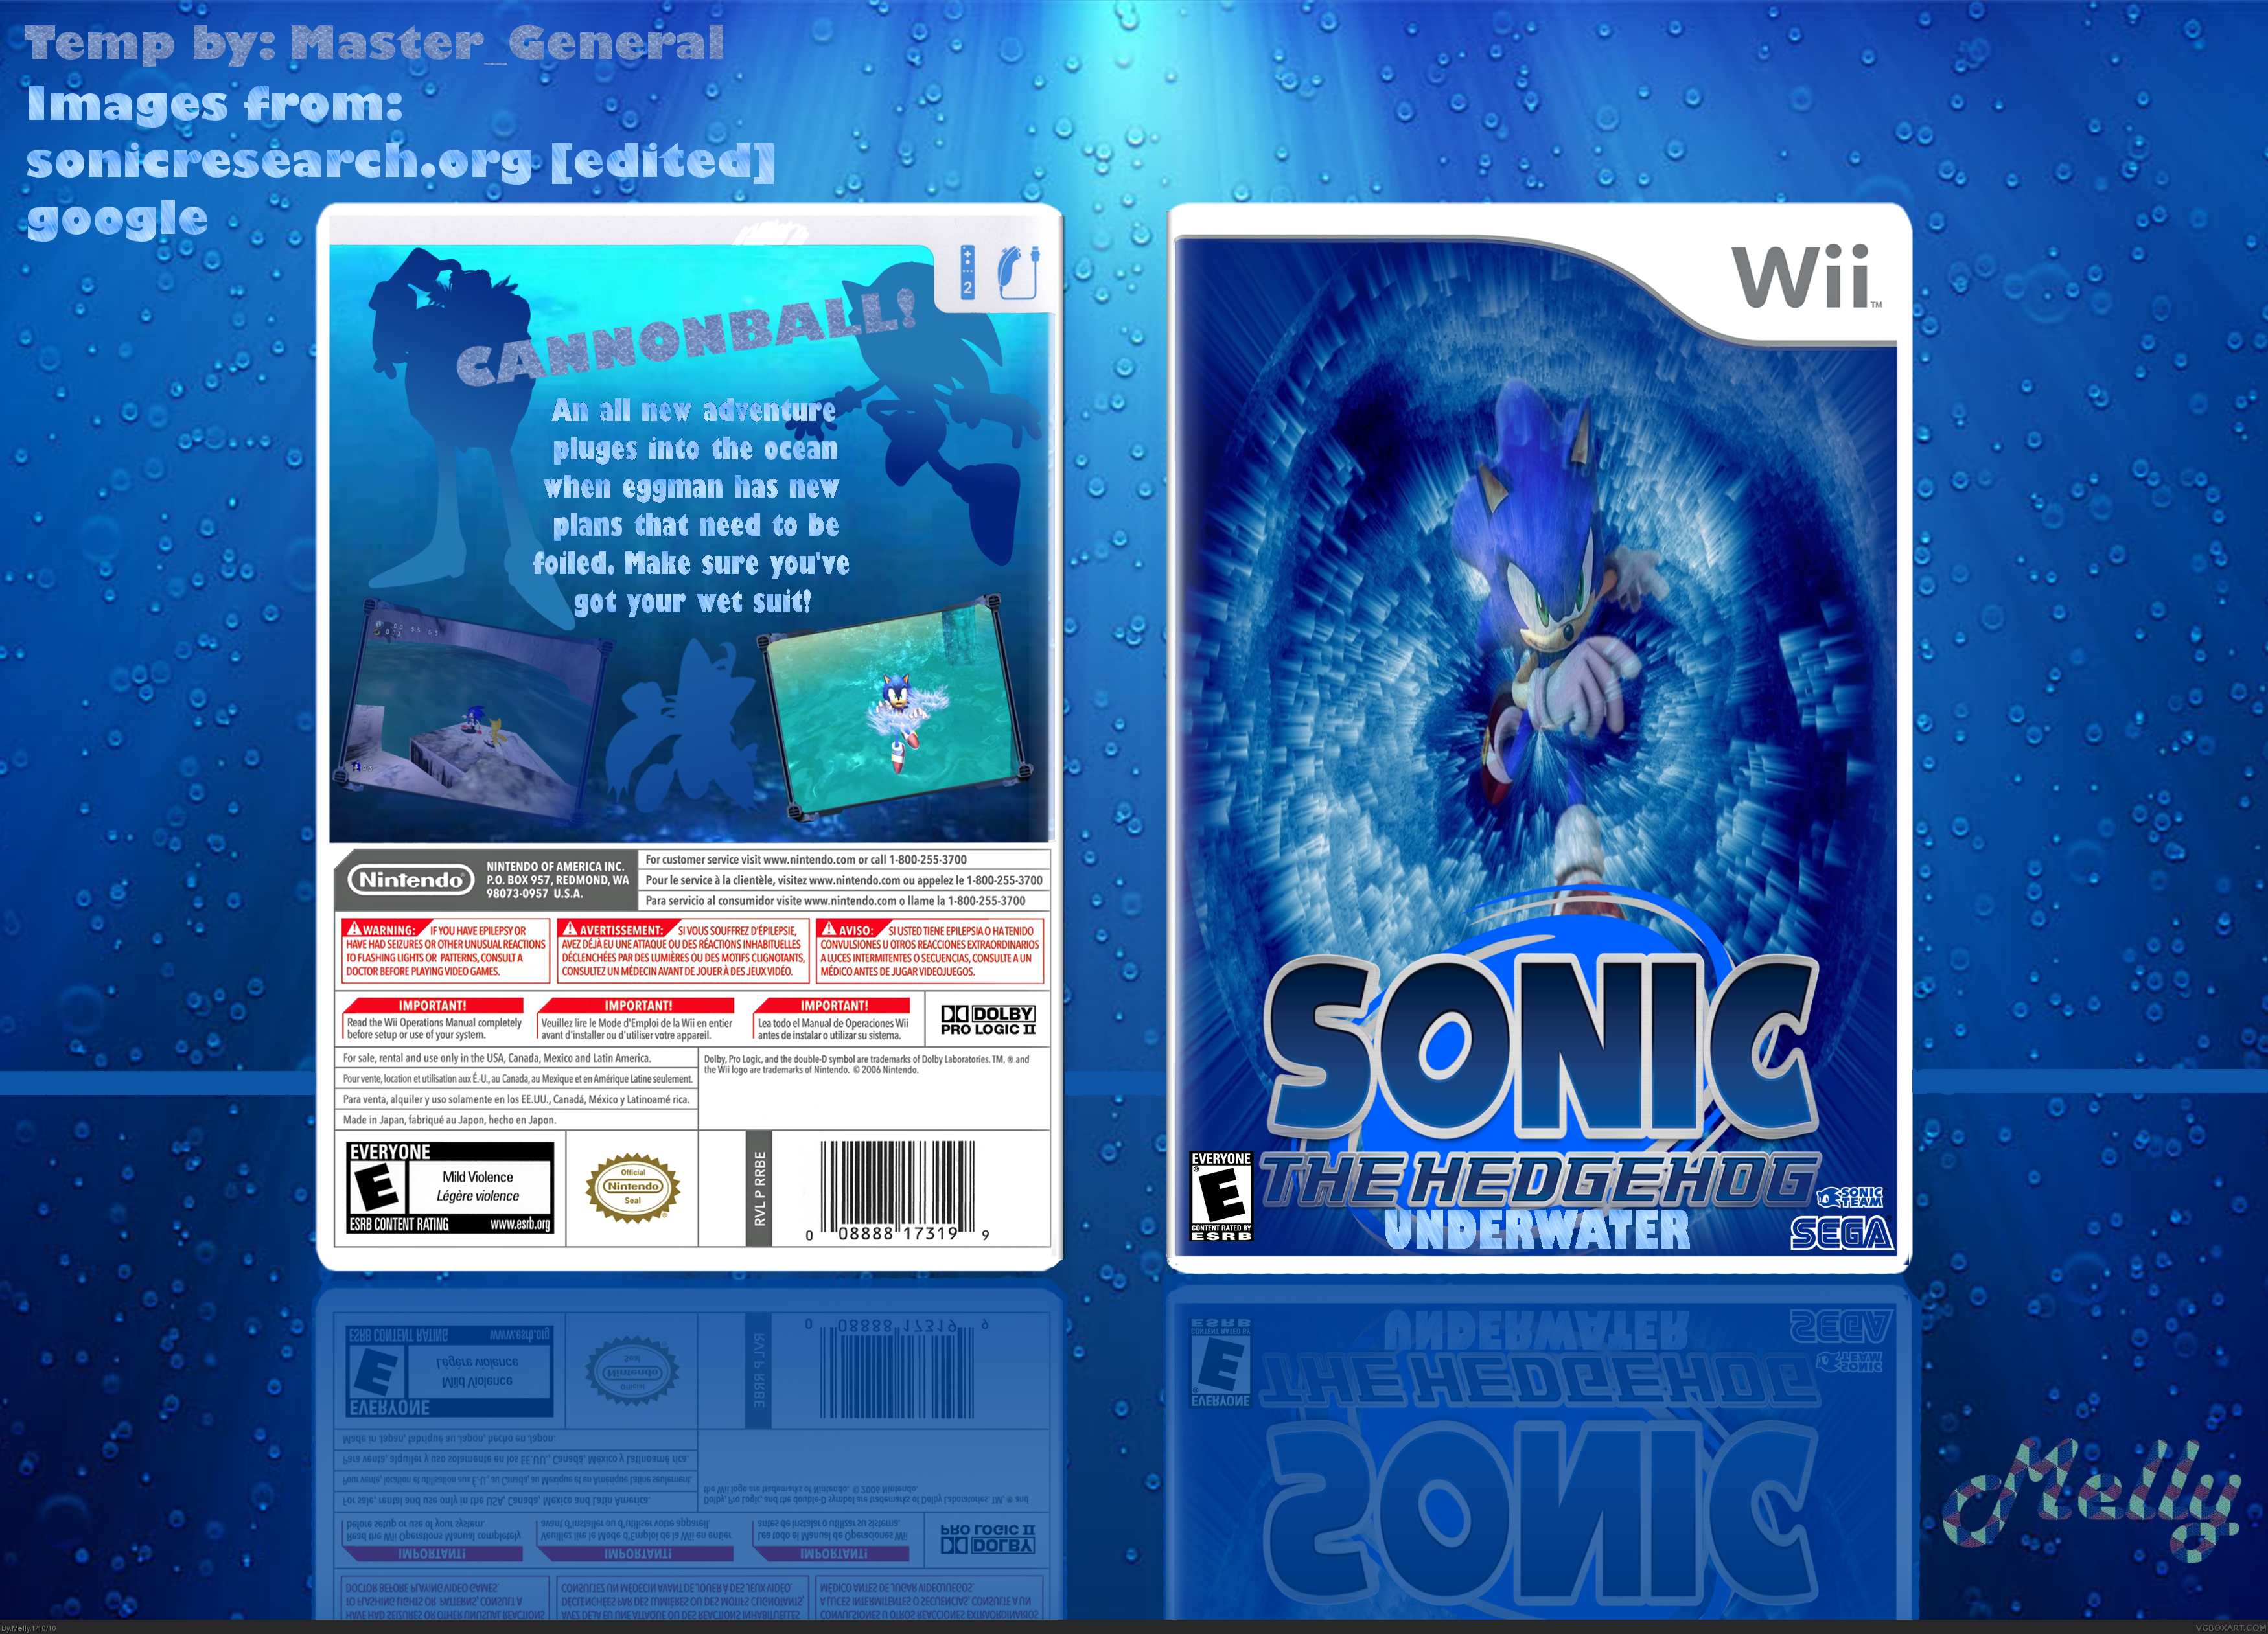 Sonic the hedgehog: UNDERWATER box cover